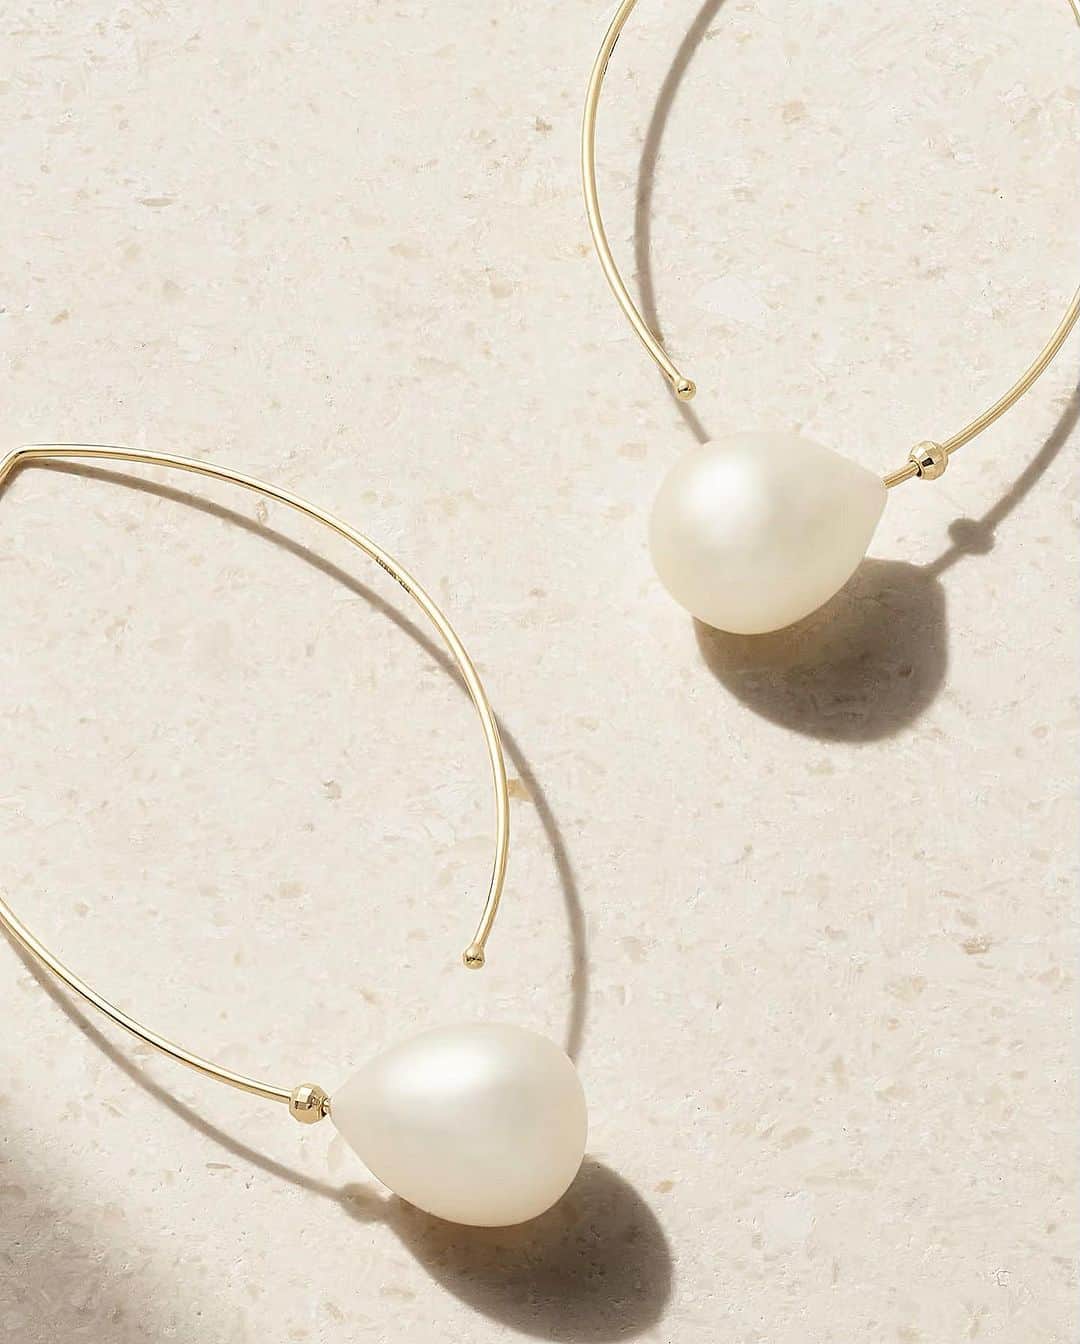 M I Z U K Iのインスタグラム：「Sensual Silhouette   M I Z U K I signature, new Marquis shaped gold earrings, most flattering shape that compliment the neckline. Now with drop pearls! Aailable on @netaporter 🤍  Wear it alone or style with other Marquis earrings and earcuff!  #netaporter #new #mizuki #mizukijewels #mizuiijewelry #seaofbeauty #modern #classic  #signature #pearl」